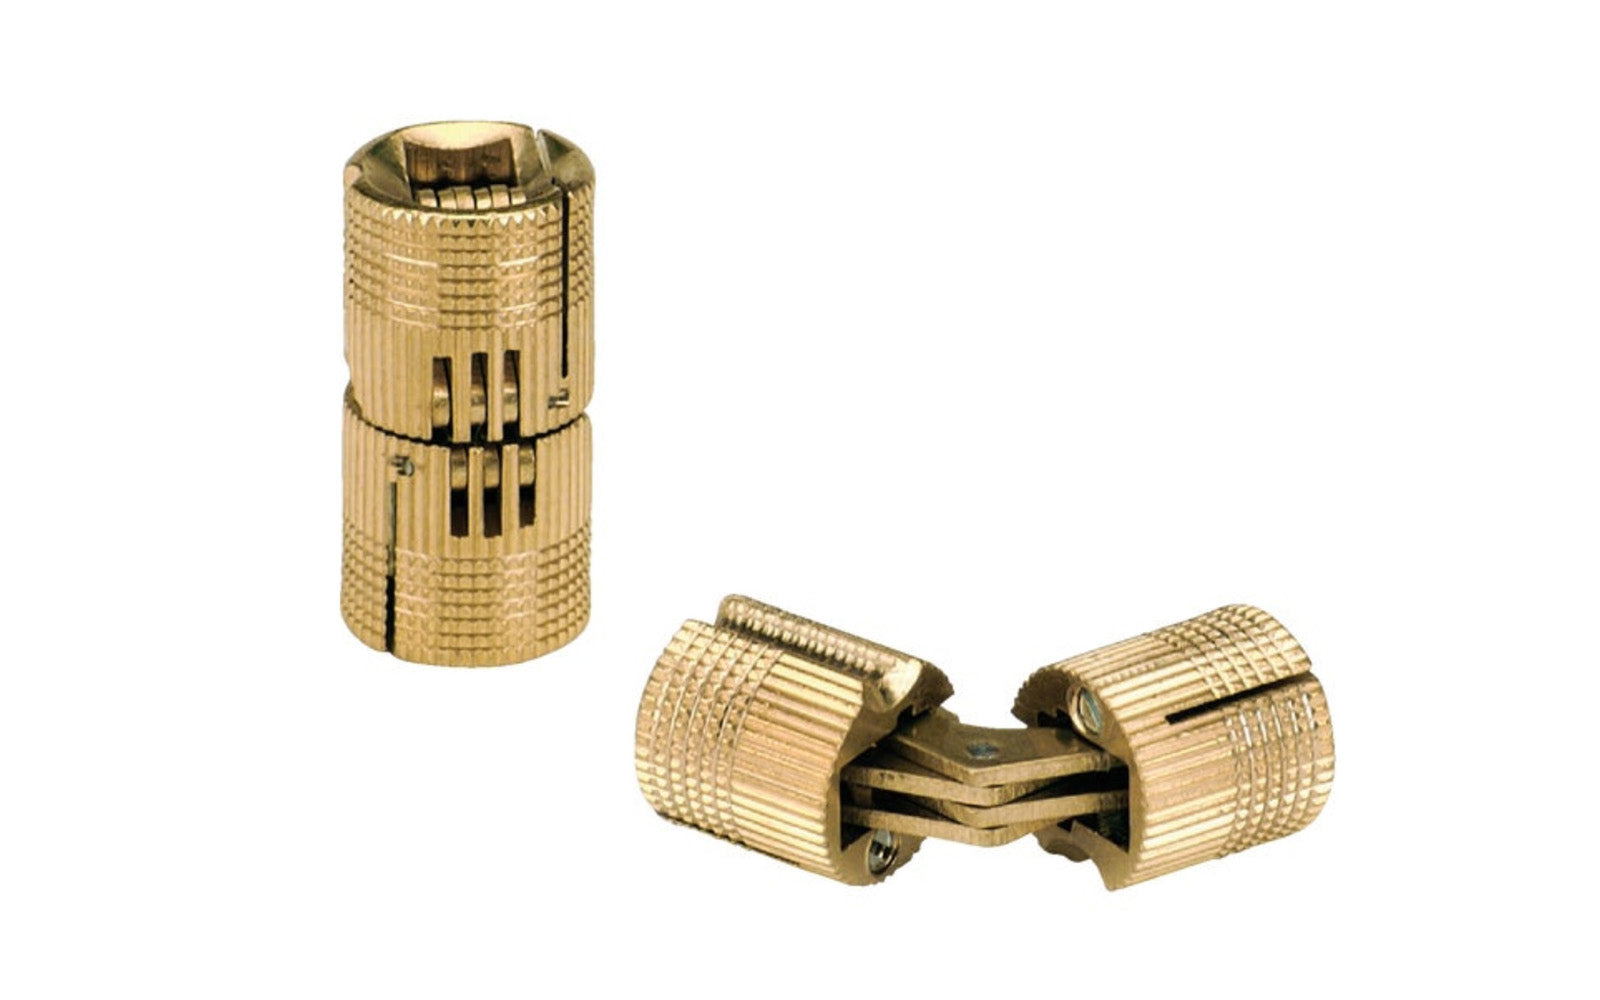 Barrel Soss Invisble Hinges offer the user more variety and easier installation. No mortising, just drill to the proper size and insert the hinge. Invisible from either side when the door is closed. Expandable wedge design gives adjustment for secure fastening. Hinge opens to 180 deg. Tamper proof design. 2 Pack